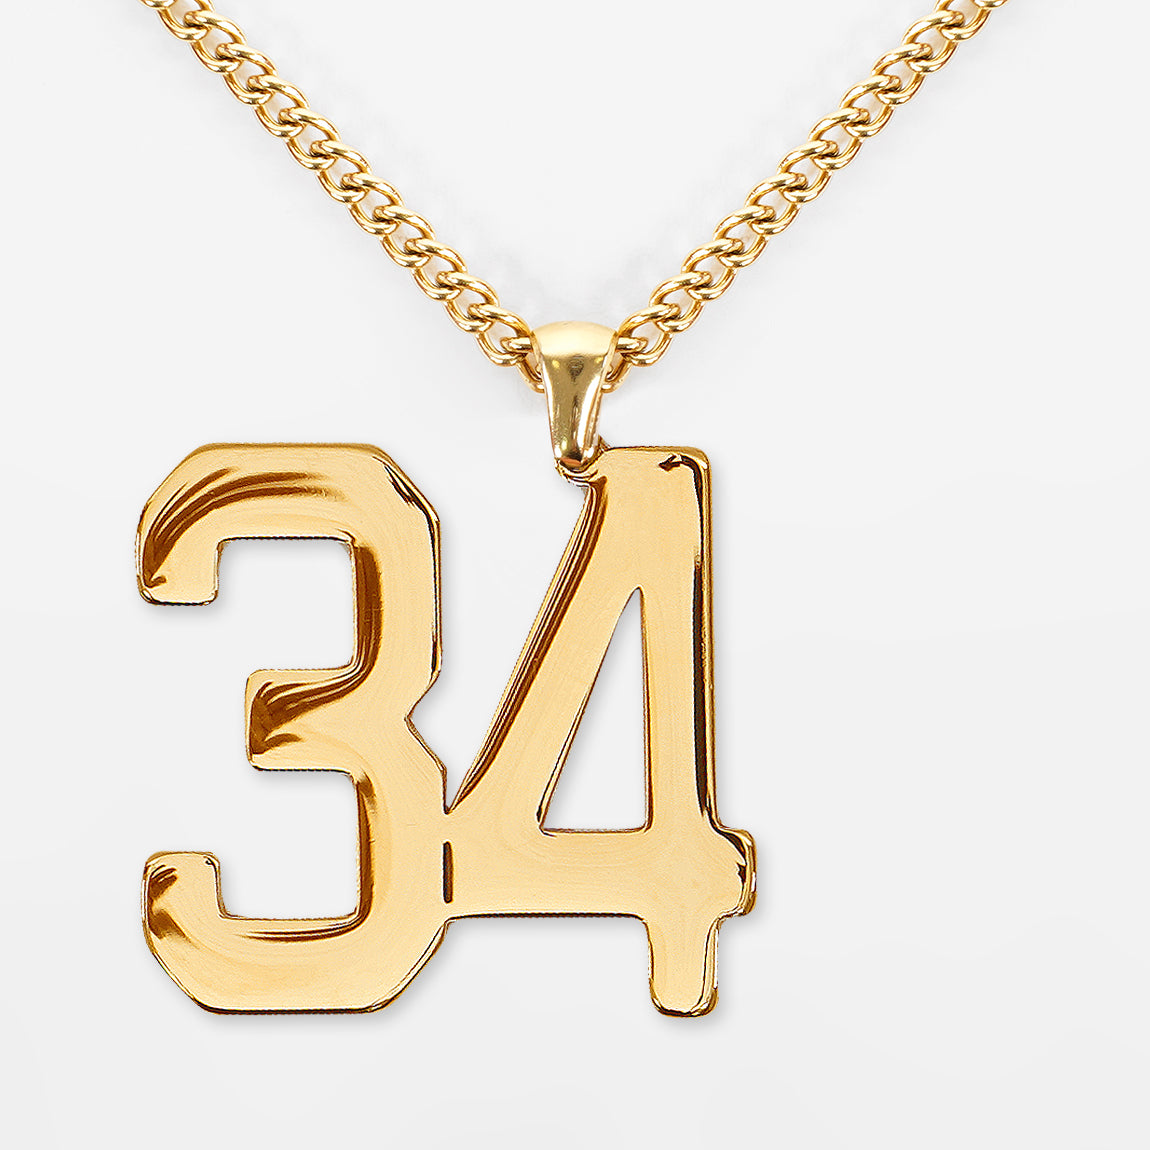 34 Number Pendant with Chain Necklace - Gold Plated Stainless Steel